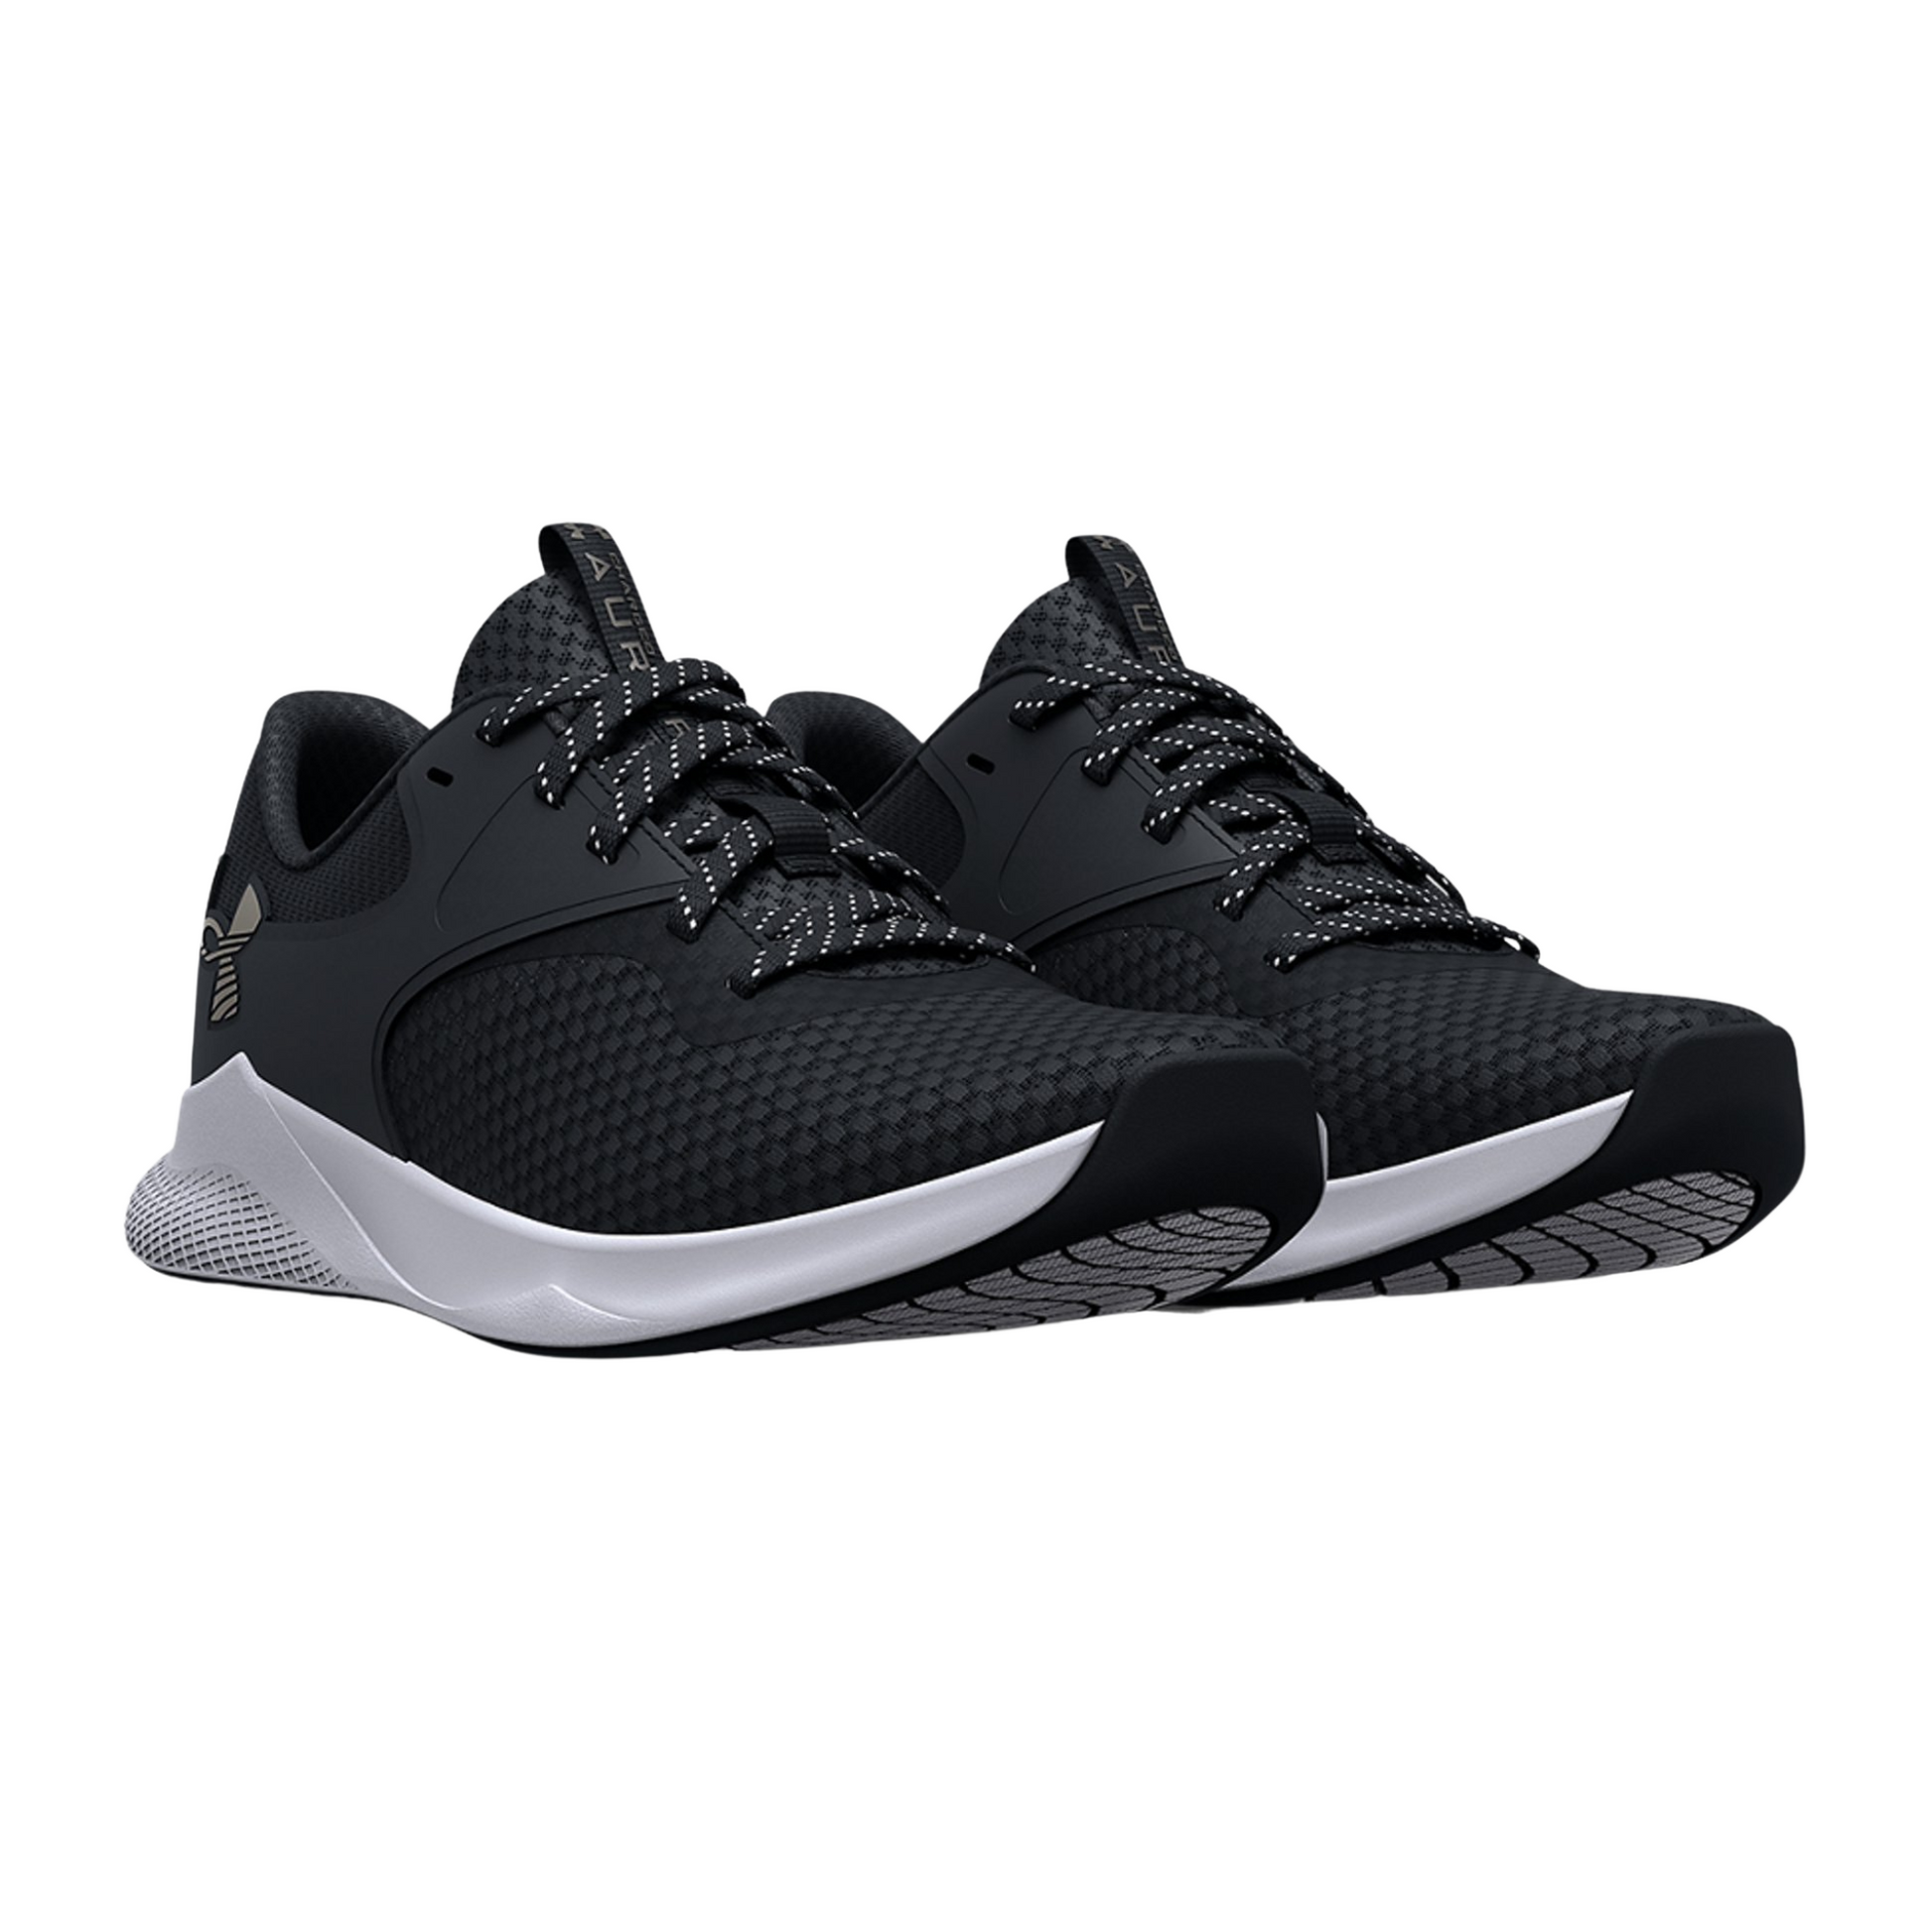 Under Armour Charged Aurora 2 Women's Cross Trainers, Black/Metallic Warm  Silver at John Lewis & Partners